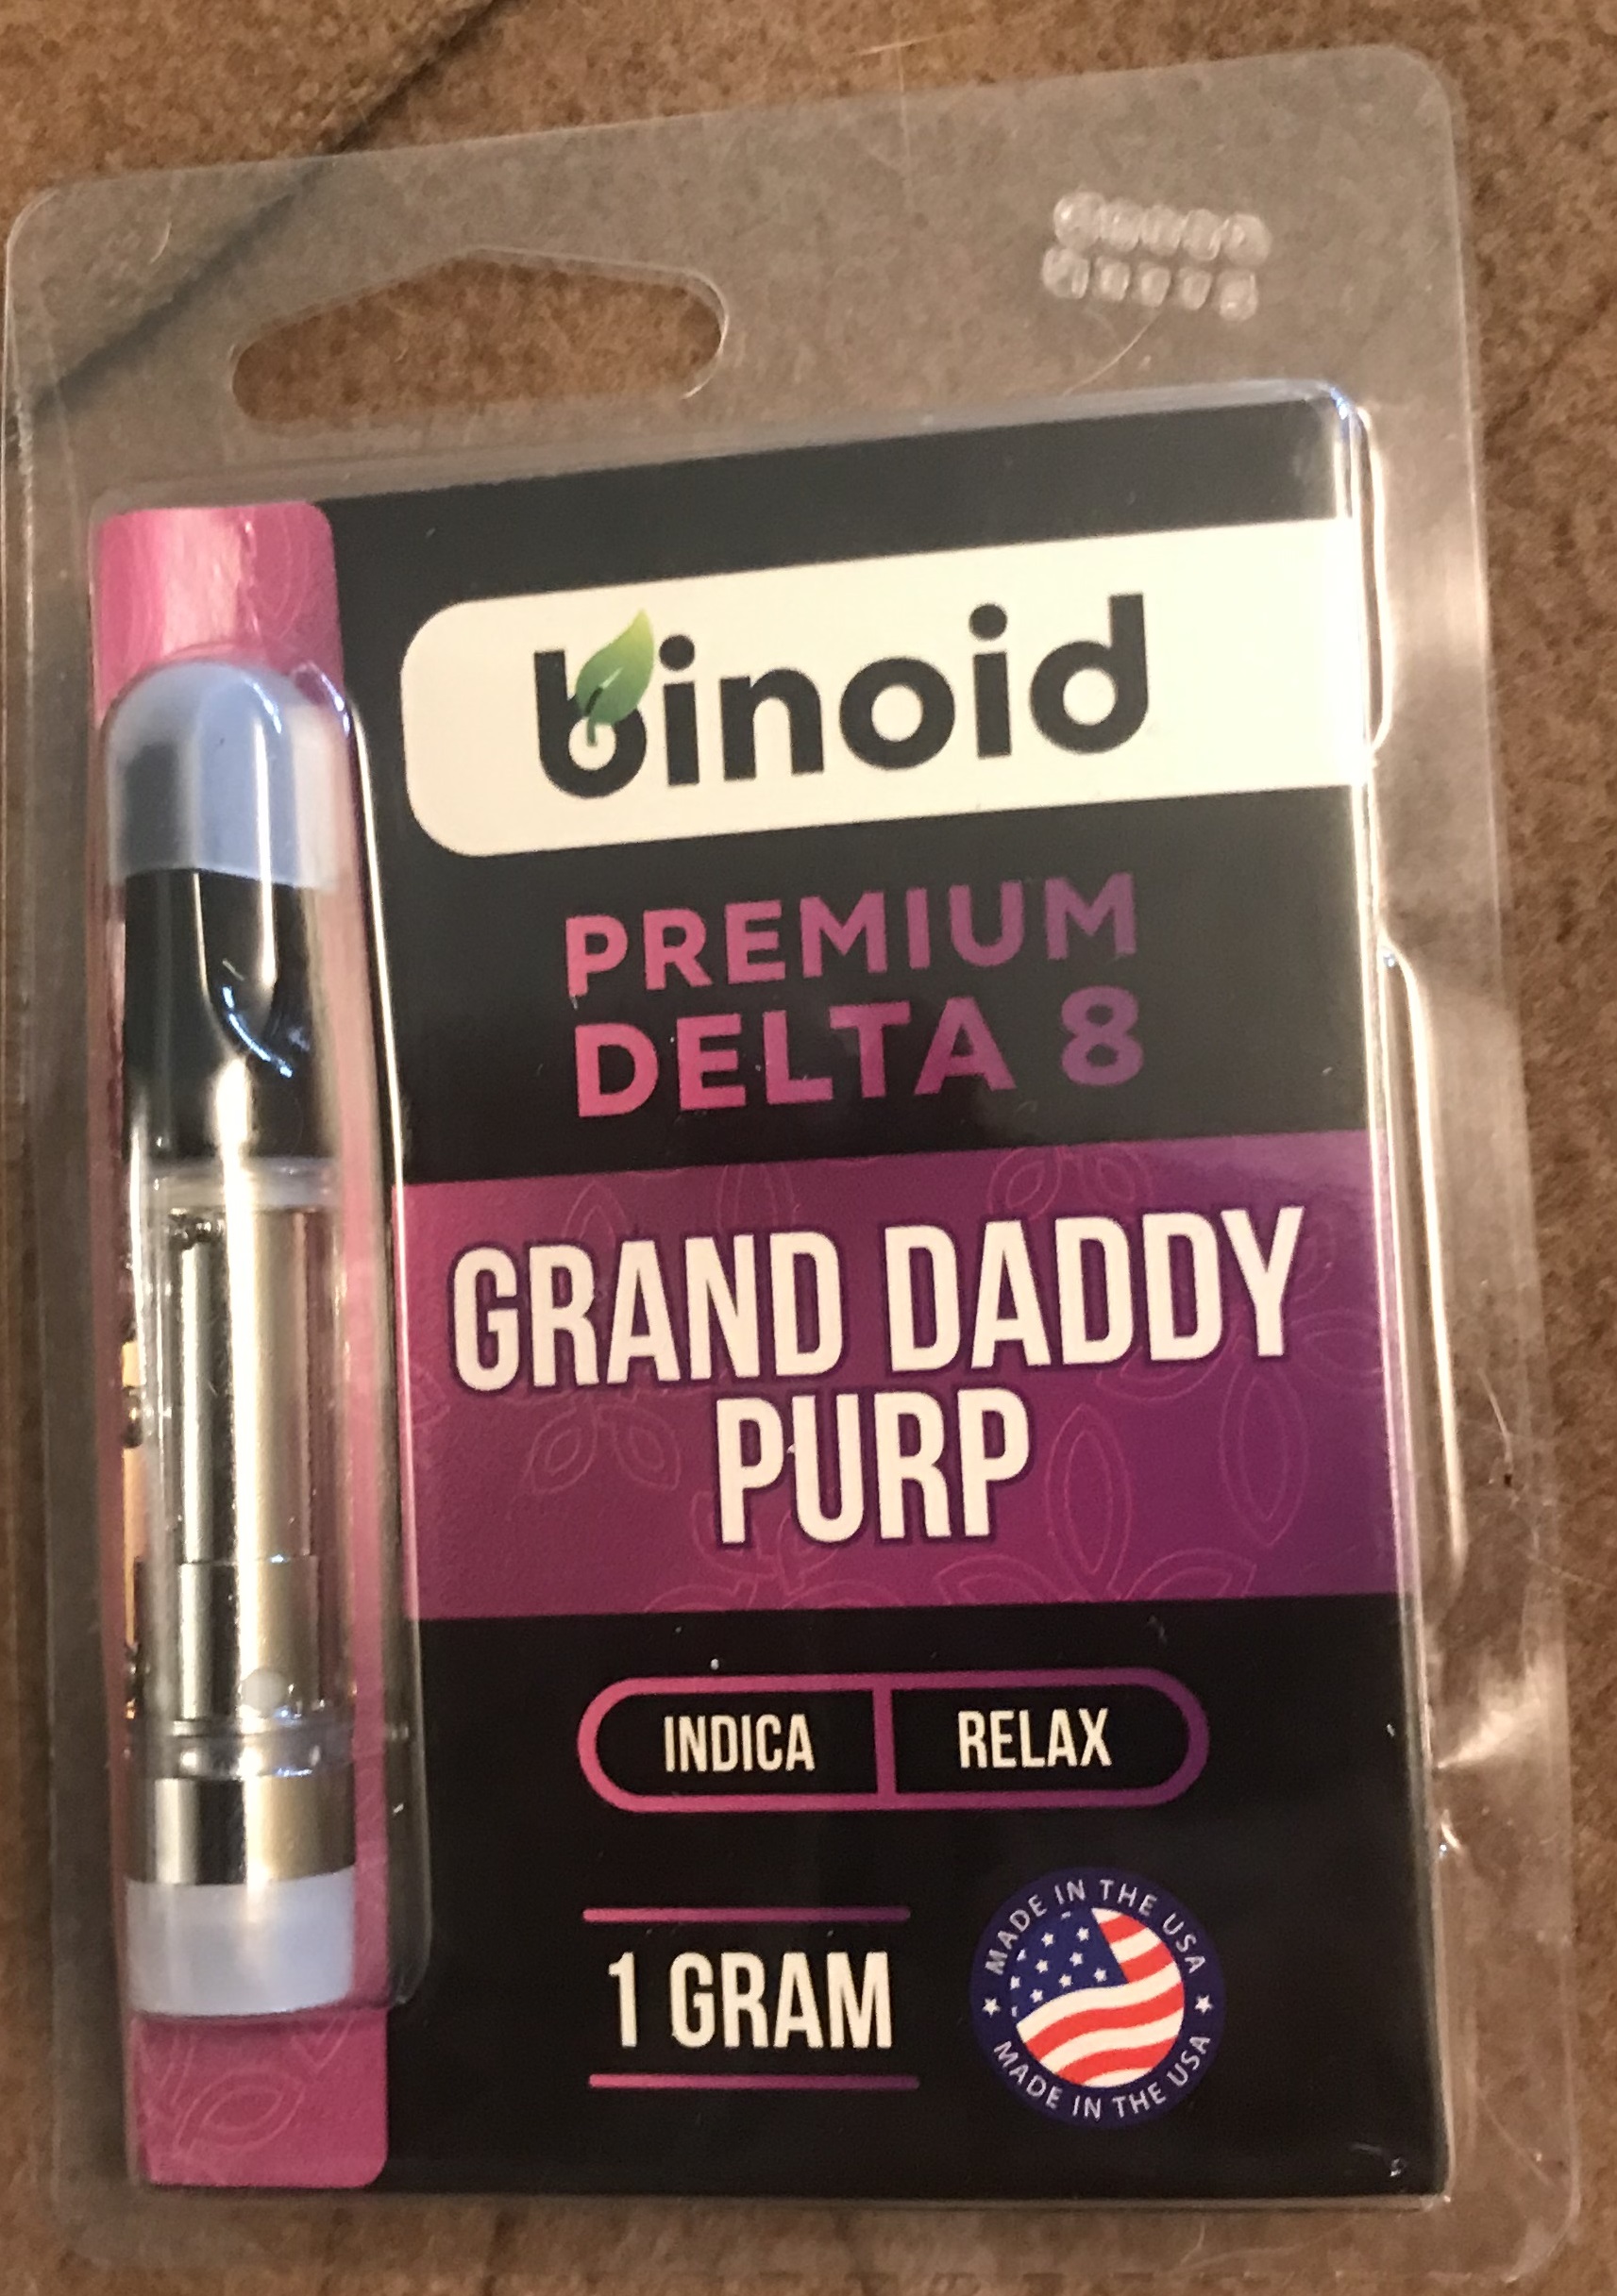 Buy Delta 8 Flower - Products|Thc|Hemp|Brand|Gummies|Product|Delta-8|Cbd|Origin|Cannabis|Delta|Users|Effects|Cartridges|Brands|Range|List|Research|Usasource|Options|Benefits|Plant|Companies|Vape|Source|Results|Gummy|People|Space|High-Quality|Quality|Place|Overview|Flowers|Lab|Drug|Cannabinoids|Tinctures|Overviewproducts|Cartridge|Delta-8 Thc|Delta-8 Products|Delta-9 Thc|Delta-8 Brands|Usa Source|Delta-8 Thc Products|Cannabis Plant|Federal Level|United States|Delta-8 Gummies|Delta-8 Space|Health Canada|Delta Products|Delta-8 Thc Gummies|Delta-8 Companies|Vape Cartridges|Similar Benefits|Hemp Doctor|Brand Overviewproducts|Drug Test|High-Quality Products|Organic Hemp|San Jose|Editorial Team|Farm Bill|Overview Products|Wide Range|Psychoactive Properties|Reliable Provider|Boston Hempire